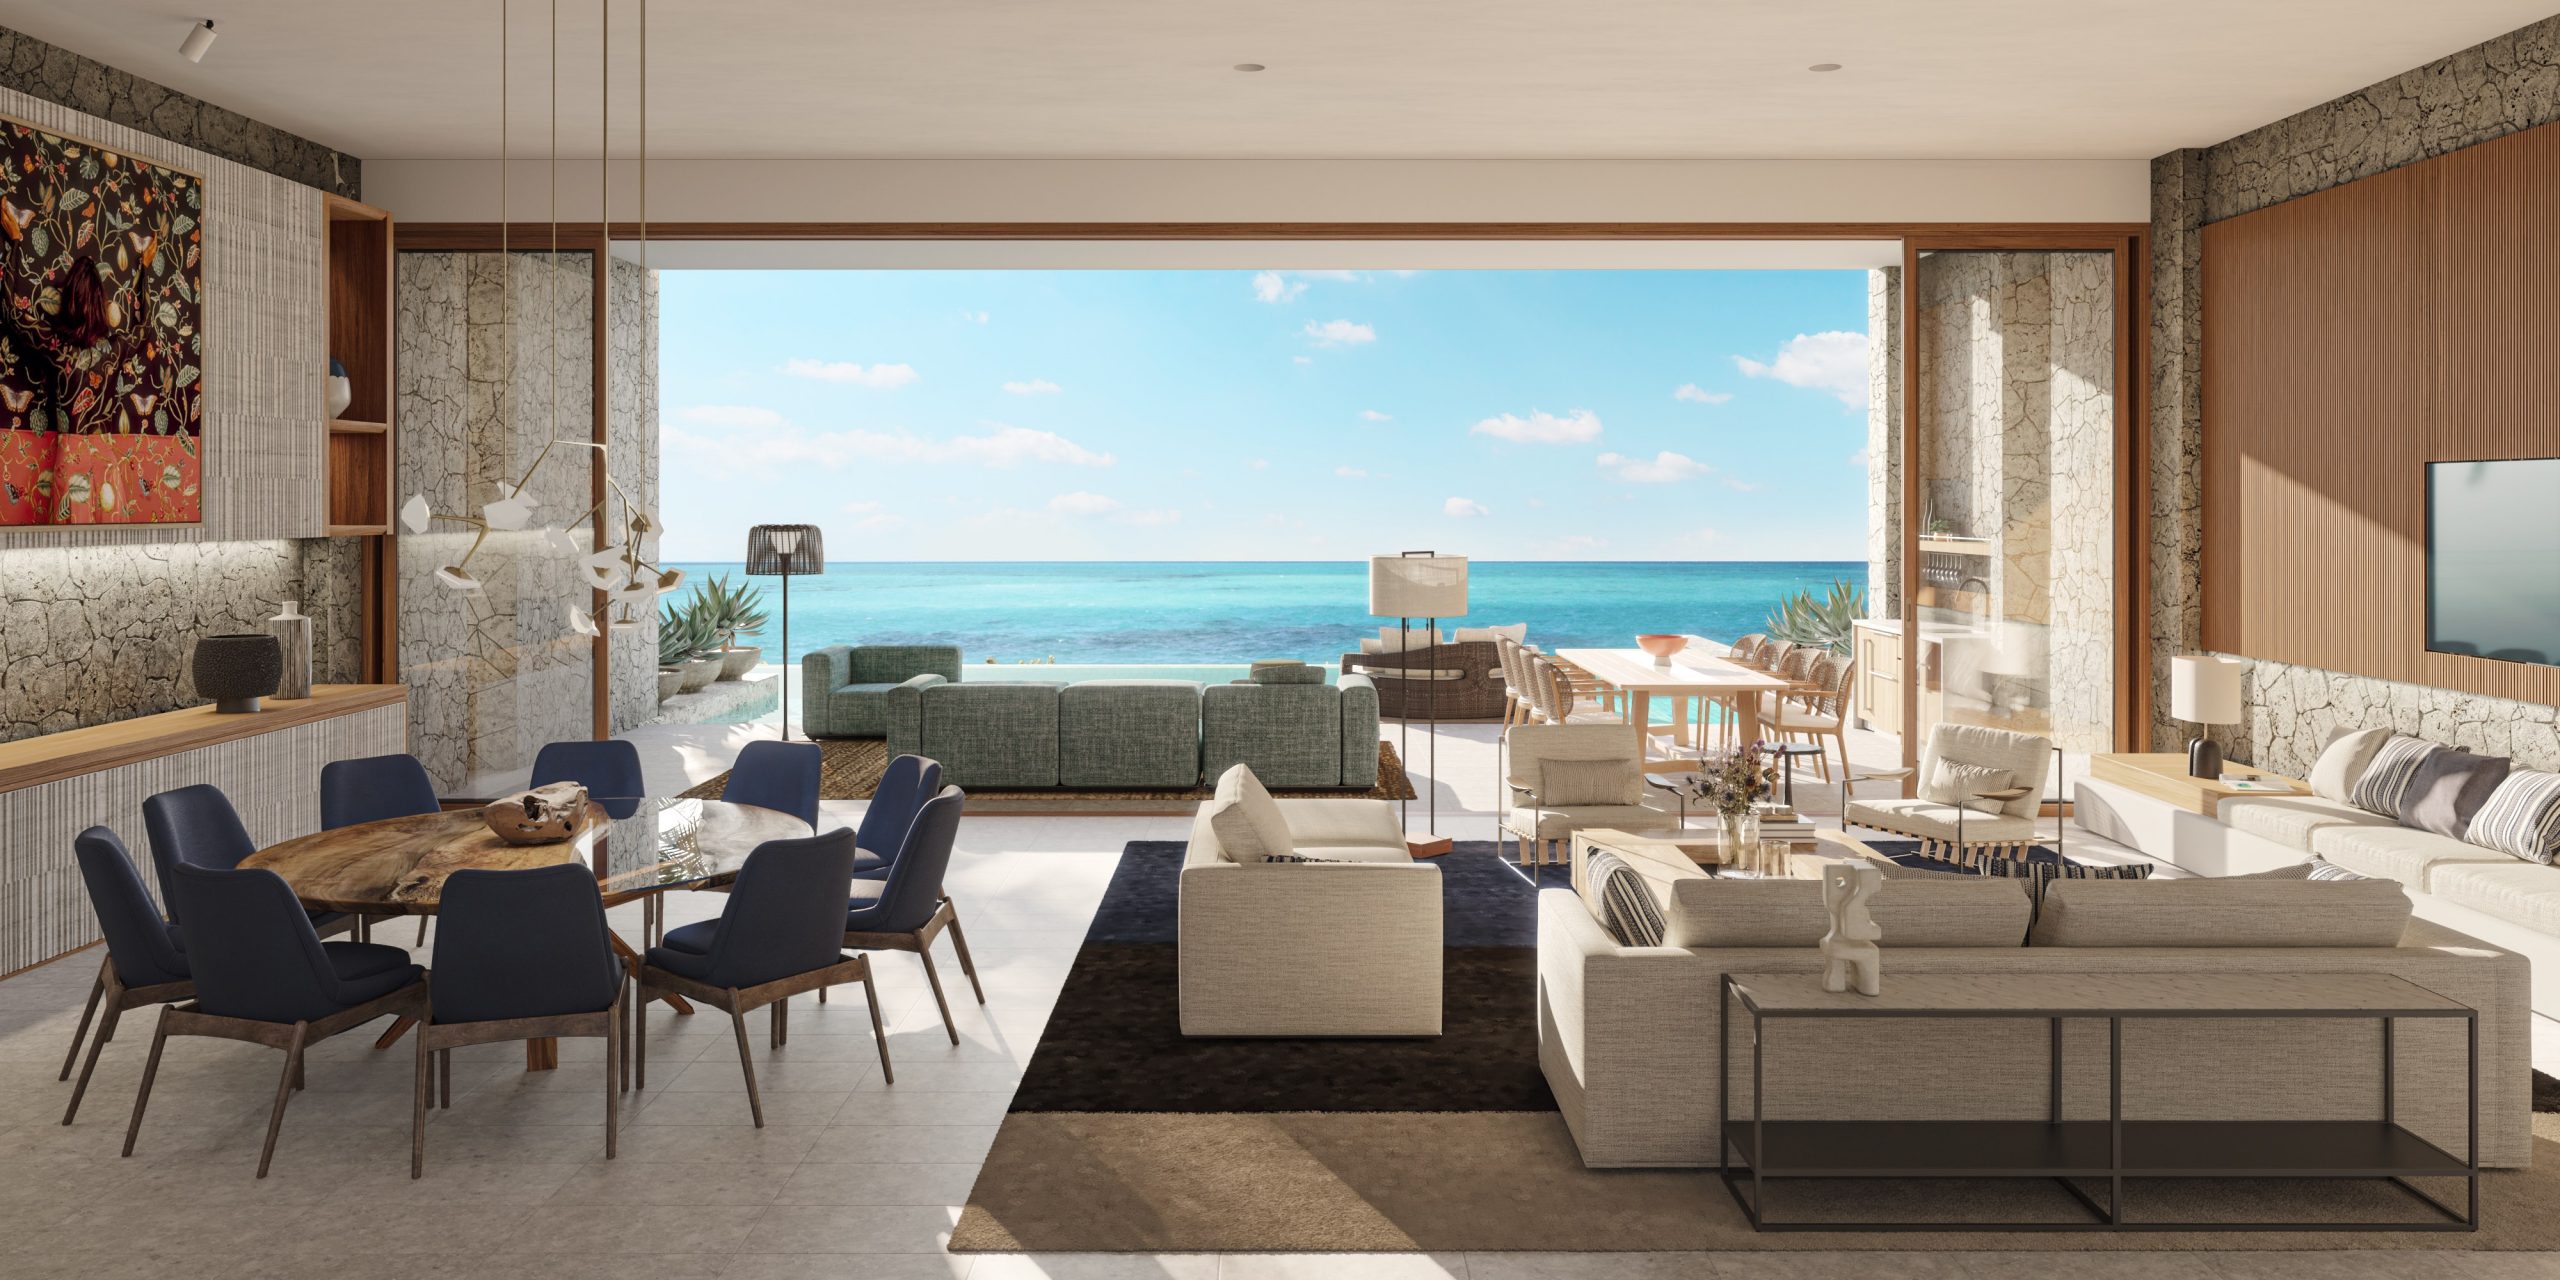 That means just 46 homes on 19 acres, all with views of Cooper Jack Bay from every room. Add a marina, a low-tide beach, another 500-by-80-foot manmade beach, and nine villas with their own private grotto beaches – and it’s a whole new world.